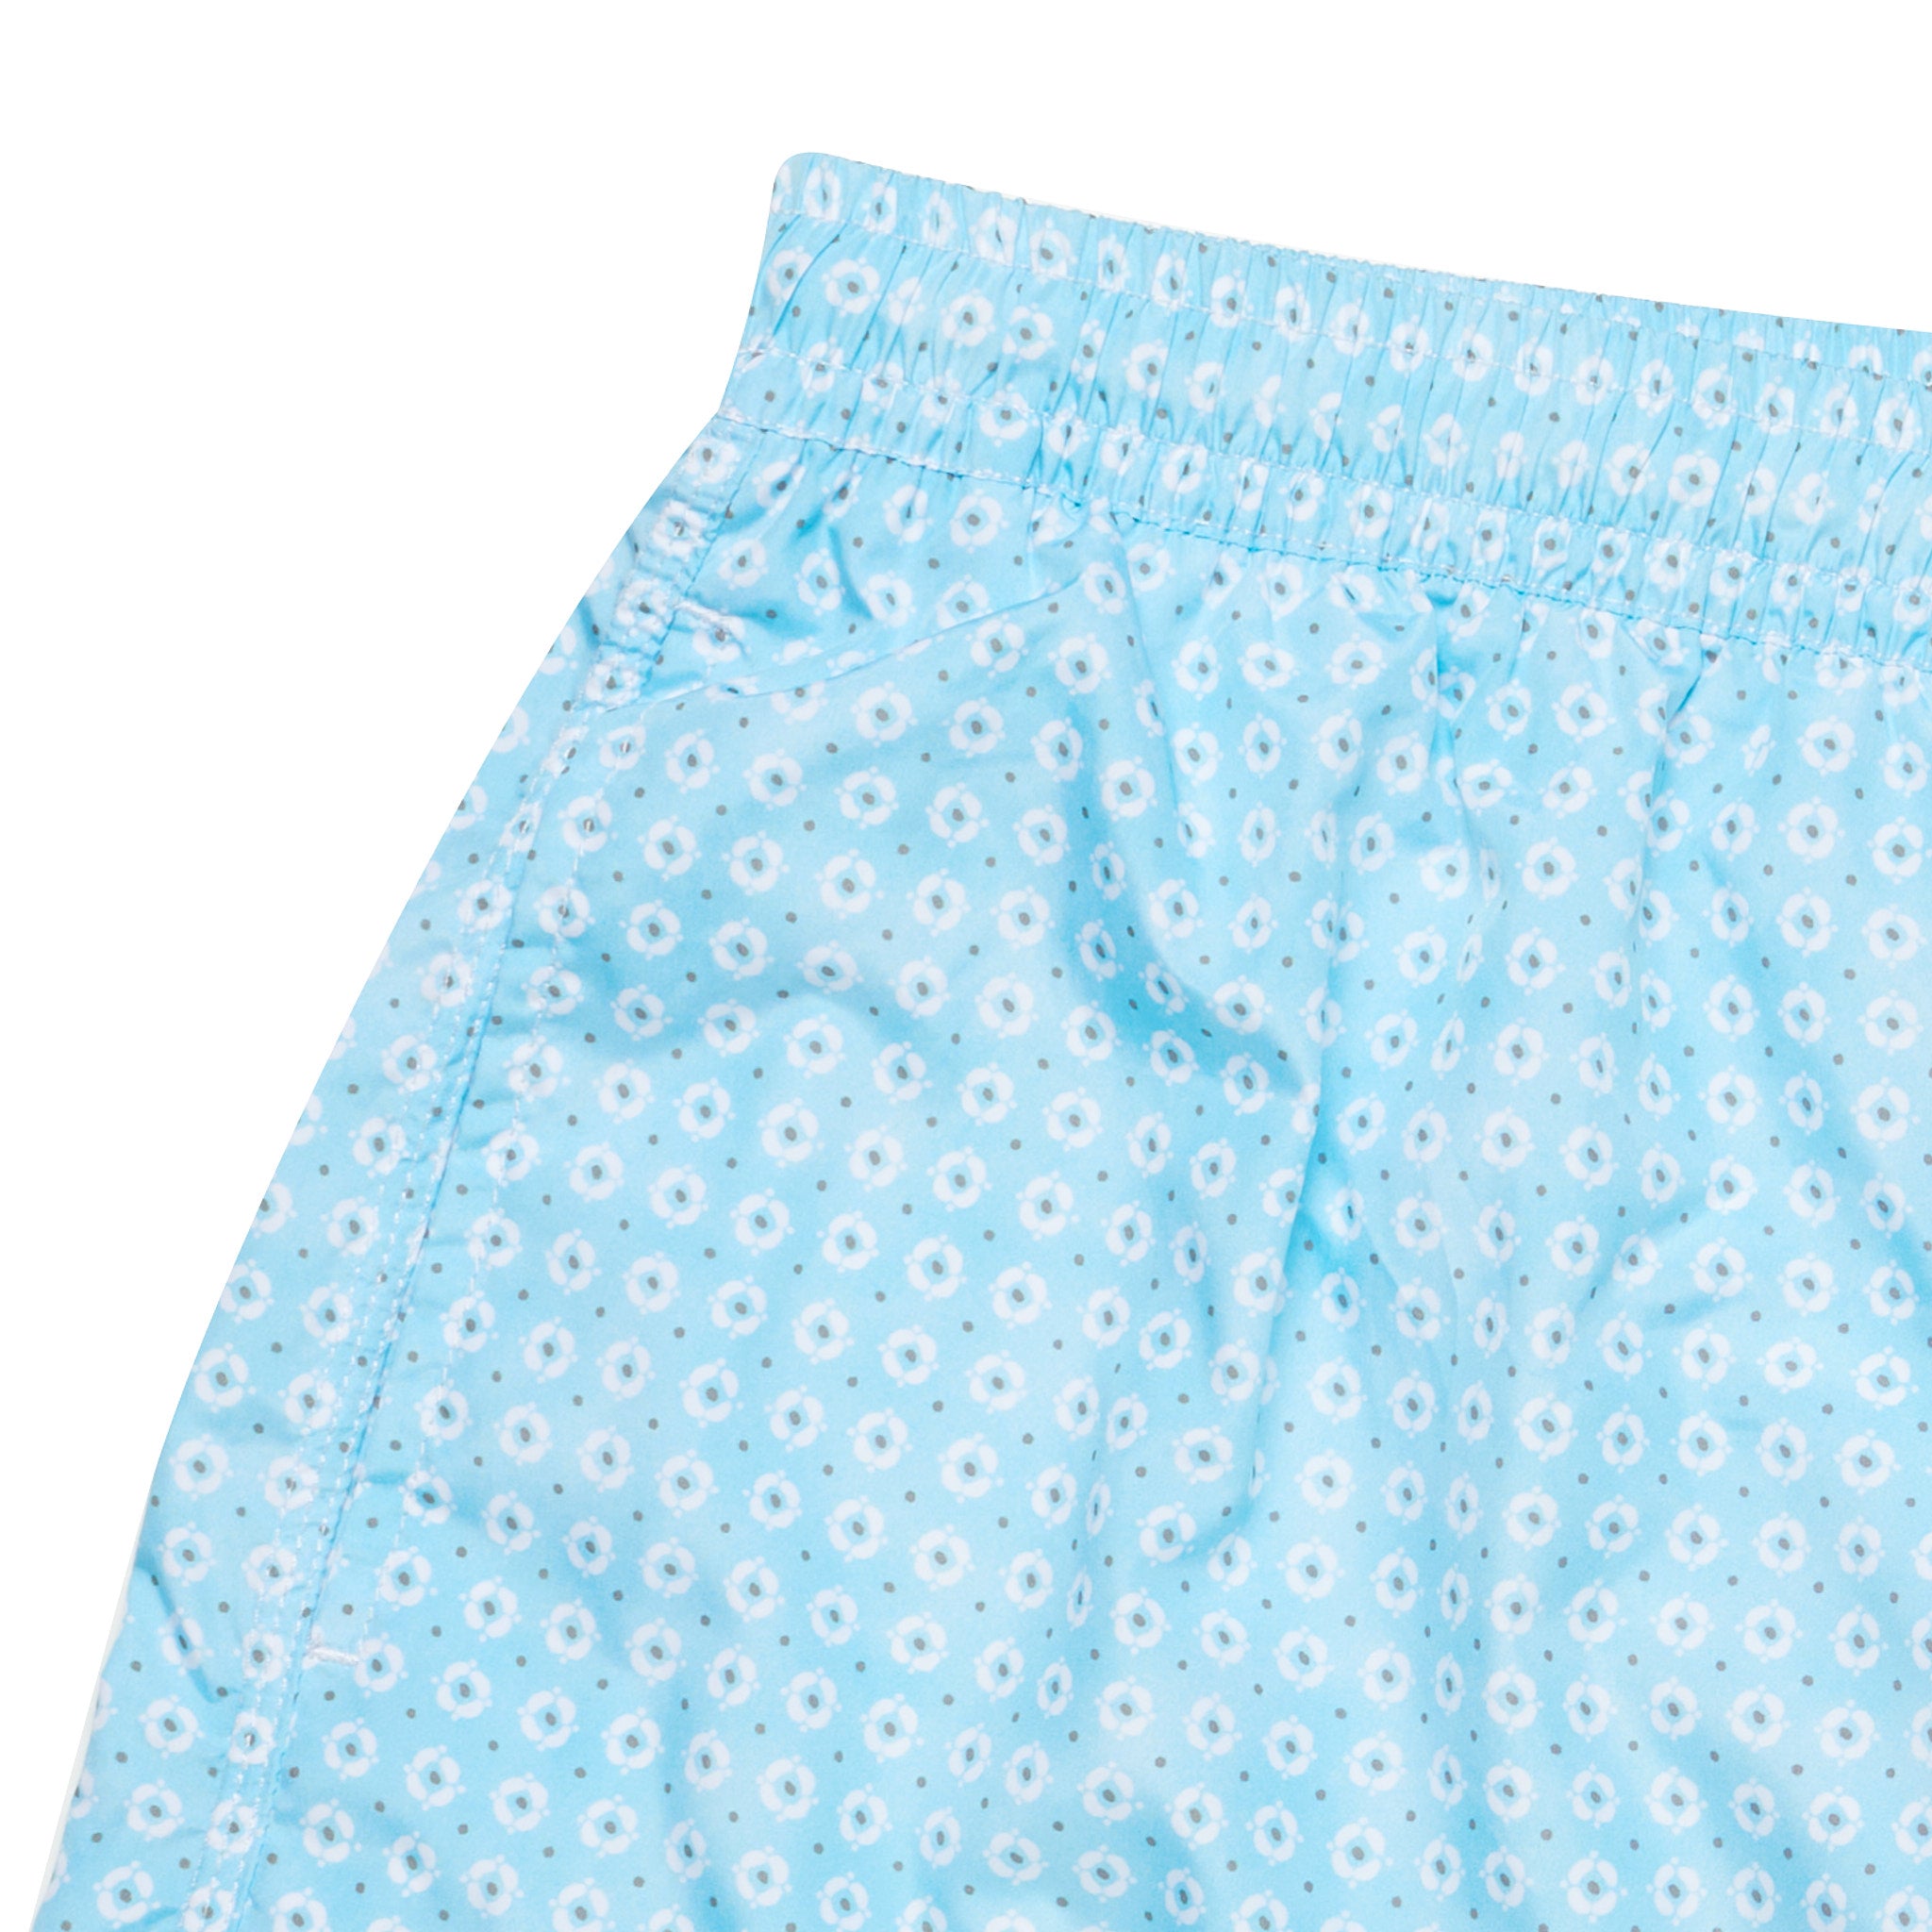 FEDELI Sky Blue Floral Dot Printed Madeira Airstop Swim Shorts Trunks NEW 2XL FEDELI